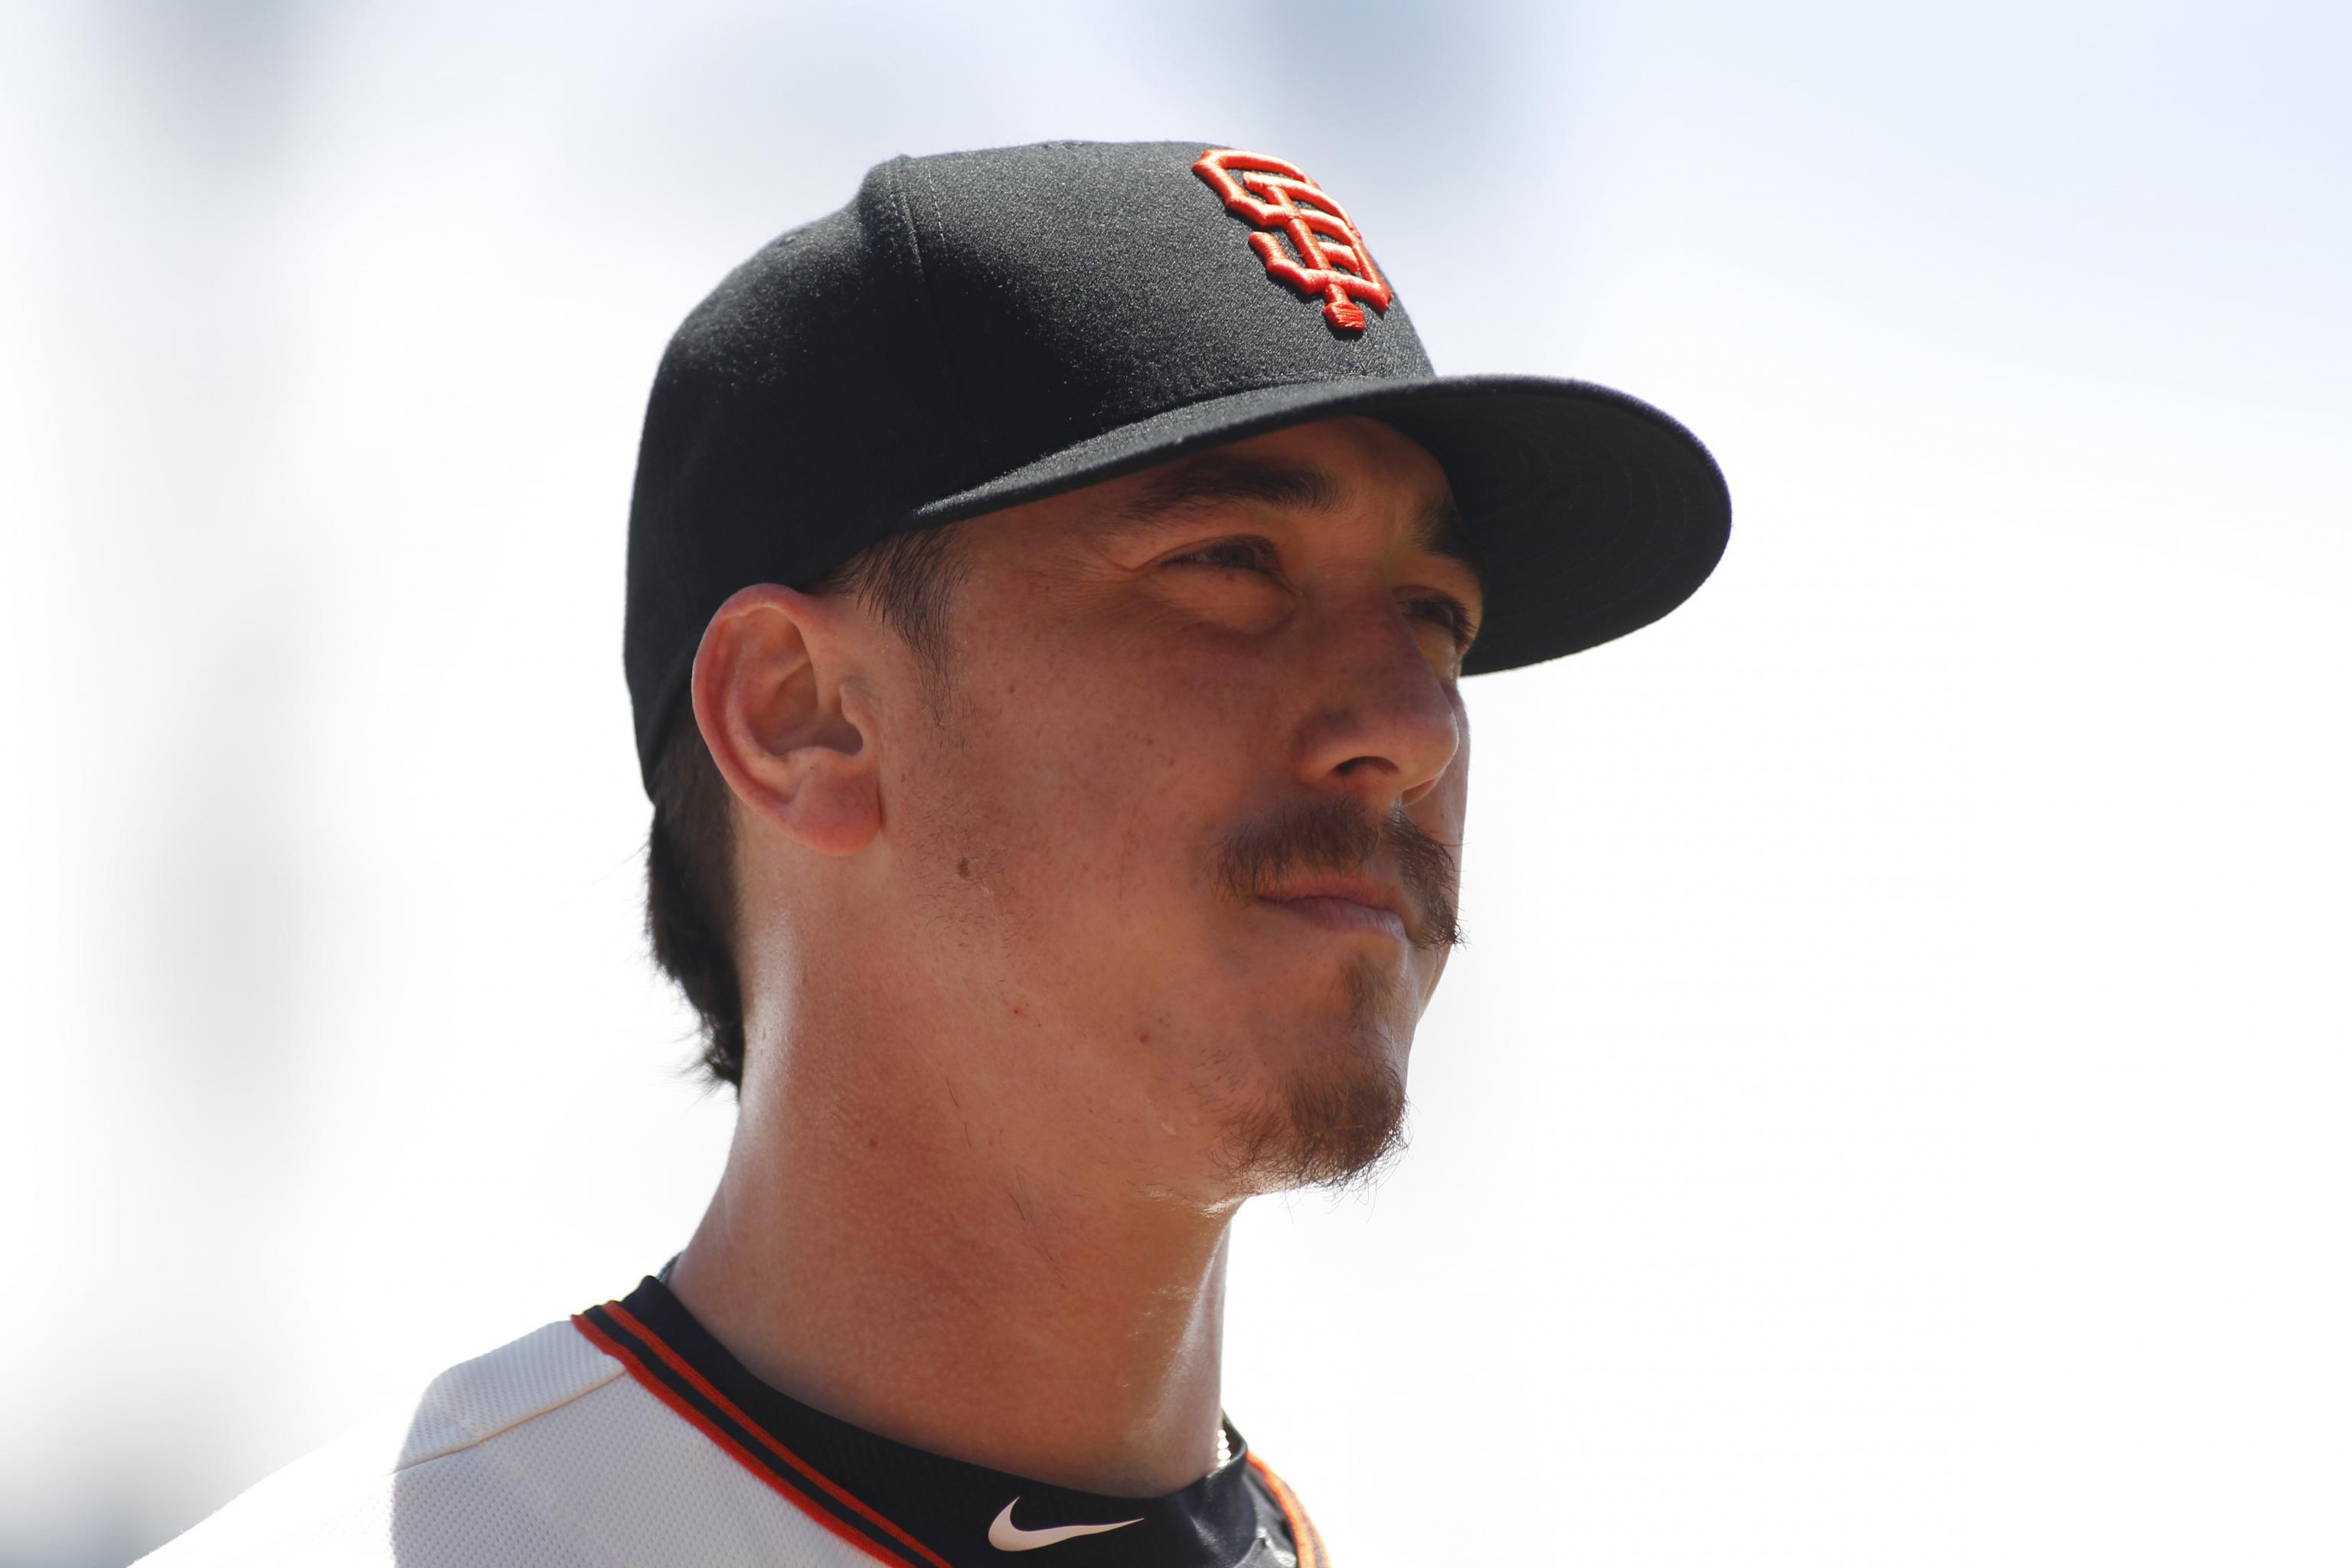 Tim Lincecum roughed up again in Angels' loss to Mariners, which might cost  him spot in rotation – Orange County Register